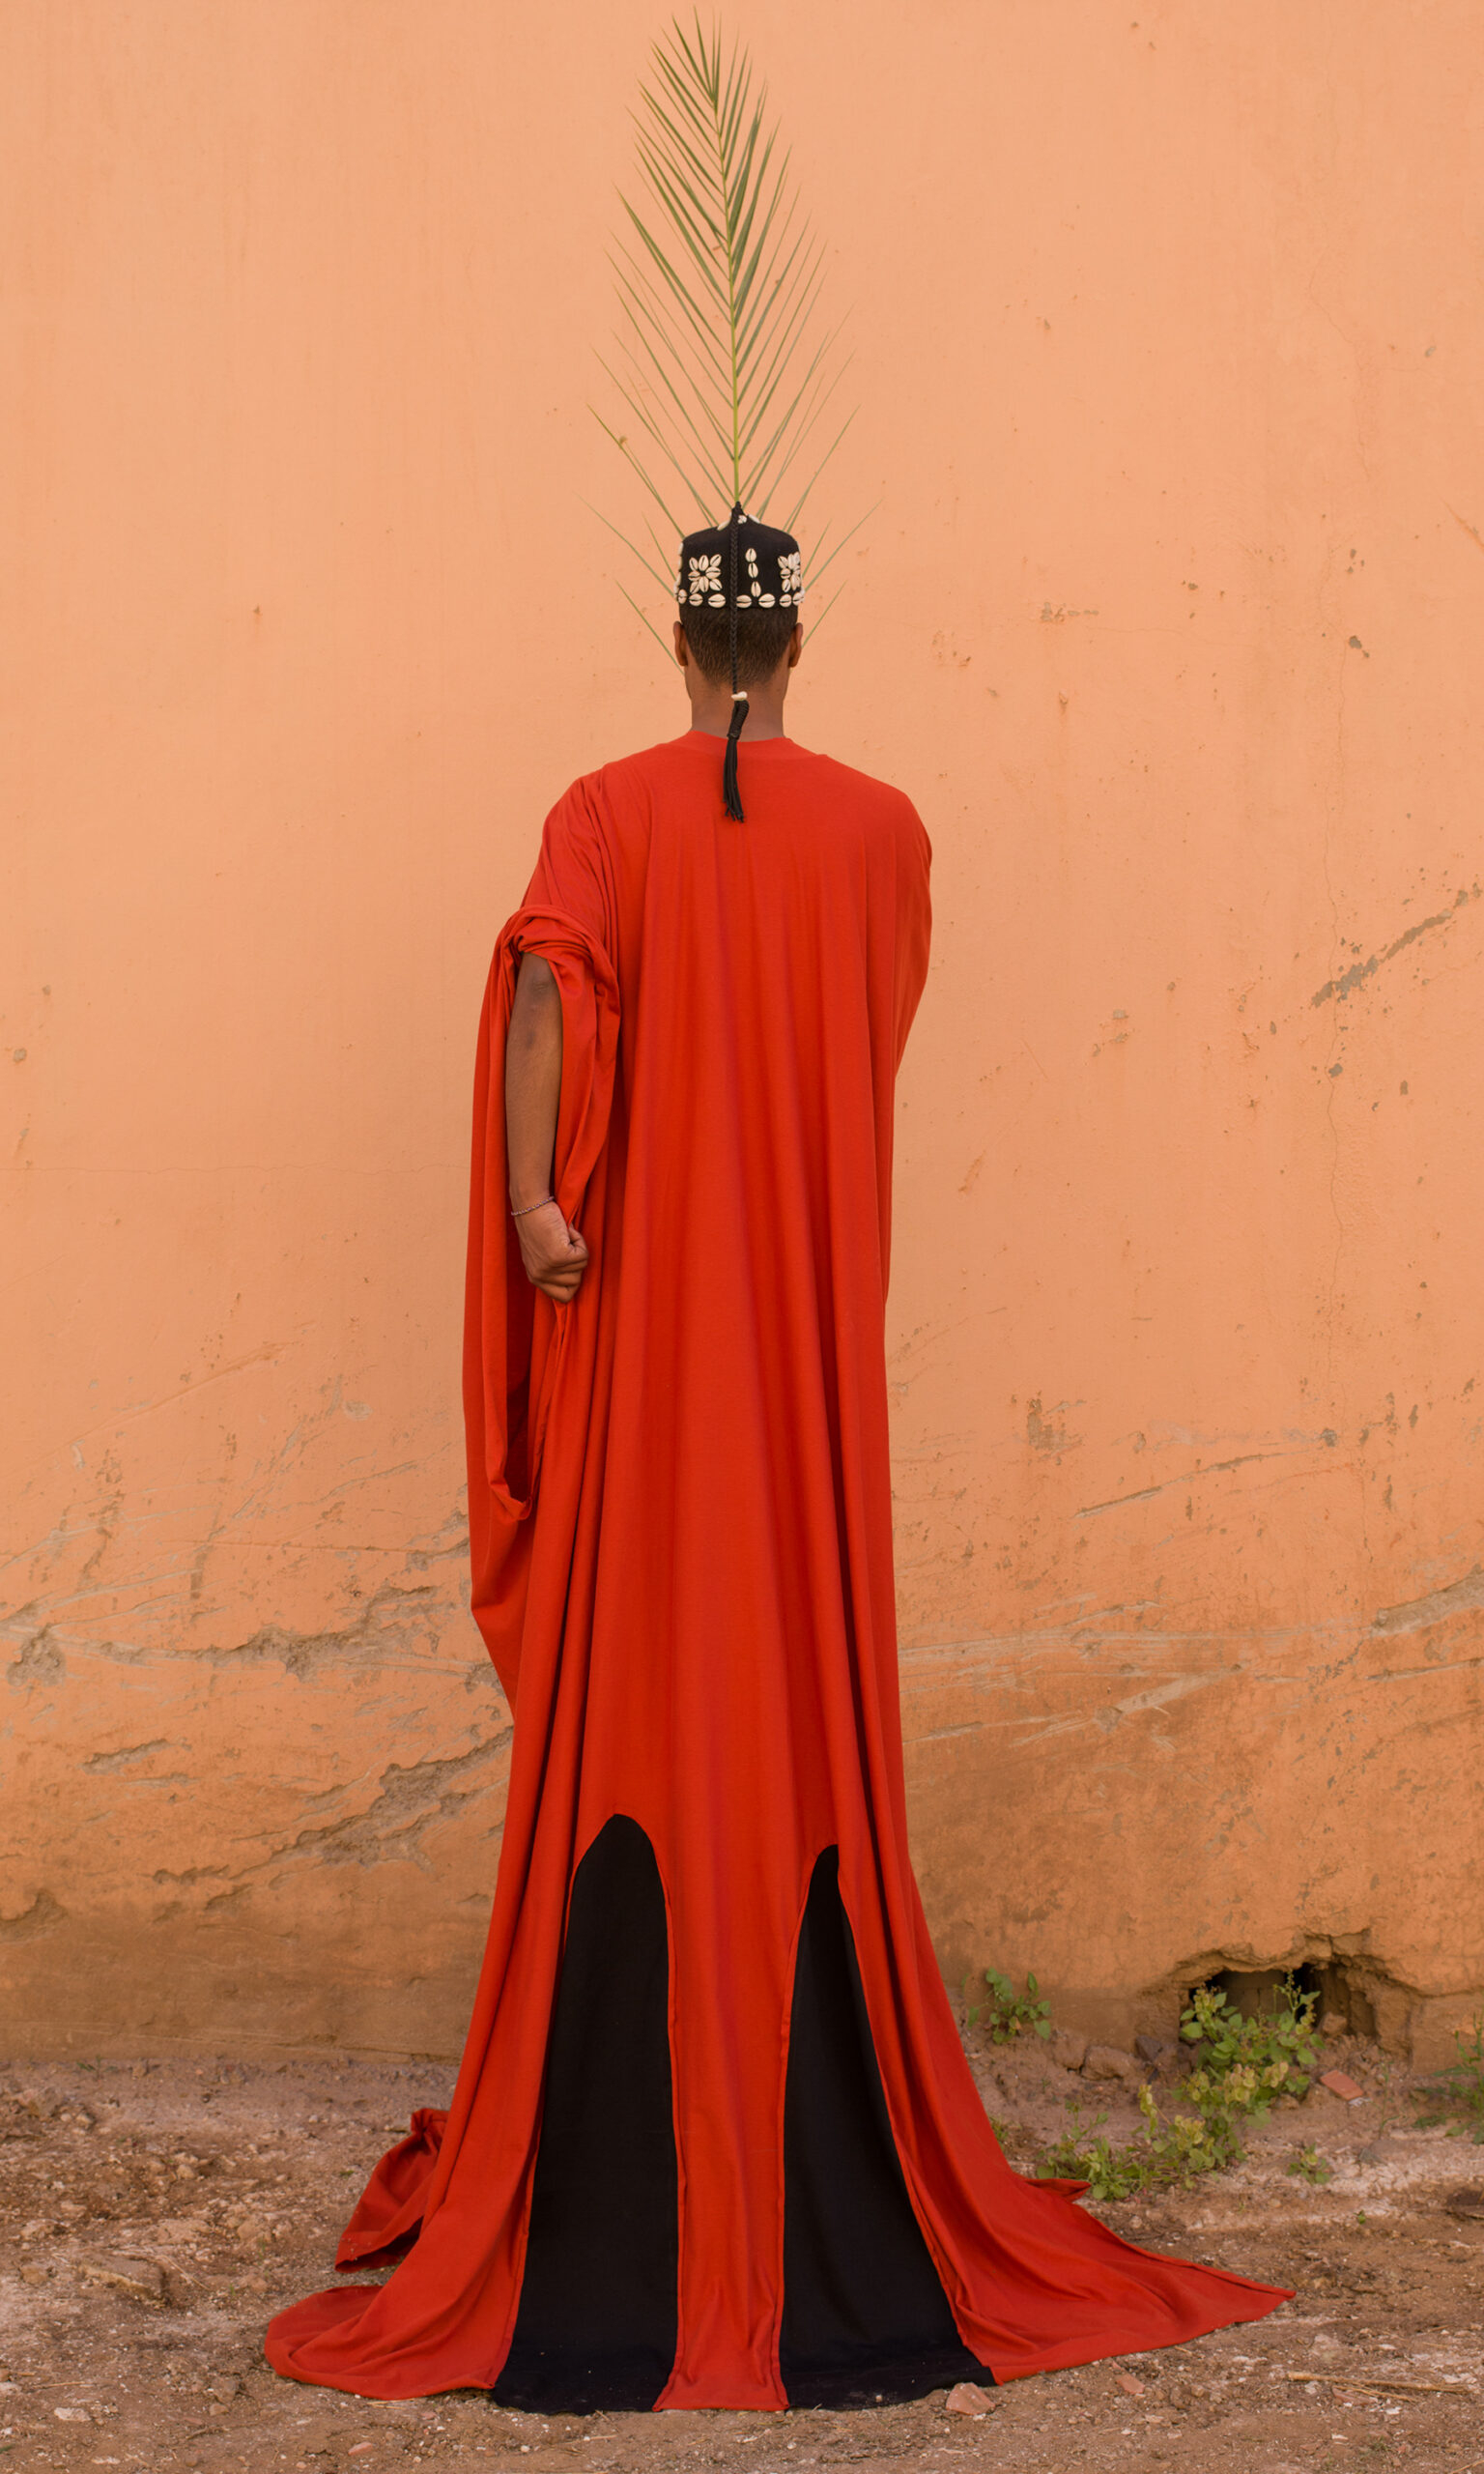 Maïmouna Guerresi, 1MA, 2020, from the series Sebaätou Rijal. Courtesy of the artist and Mariane Ibrahim Gallery ©Maïmouna Guerresi